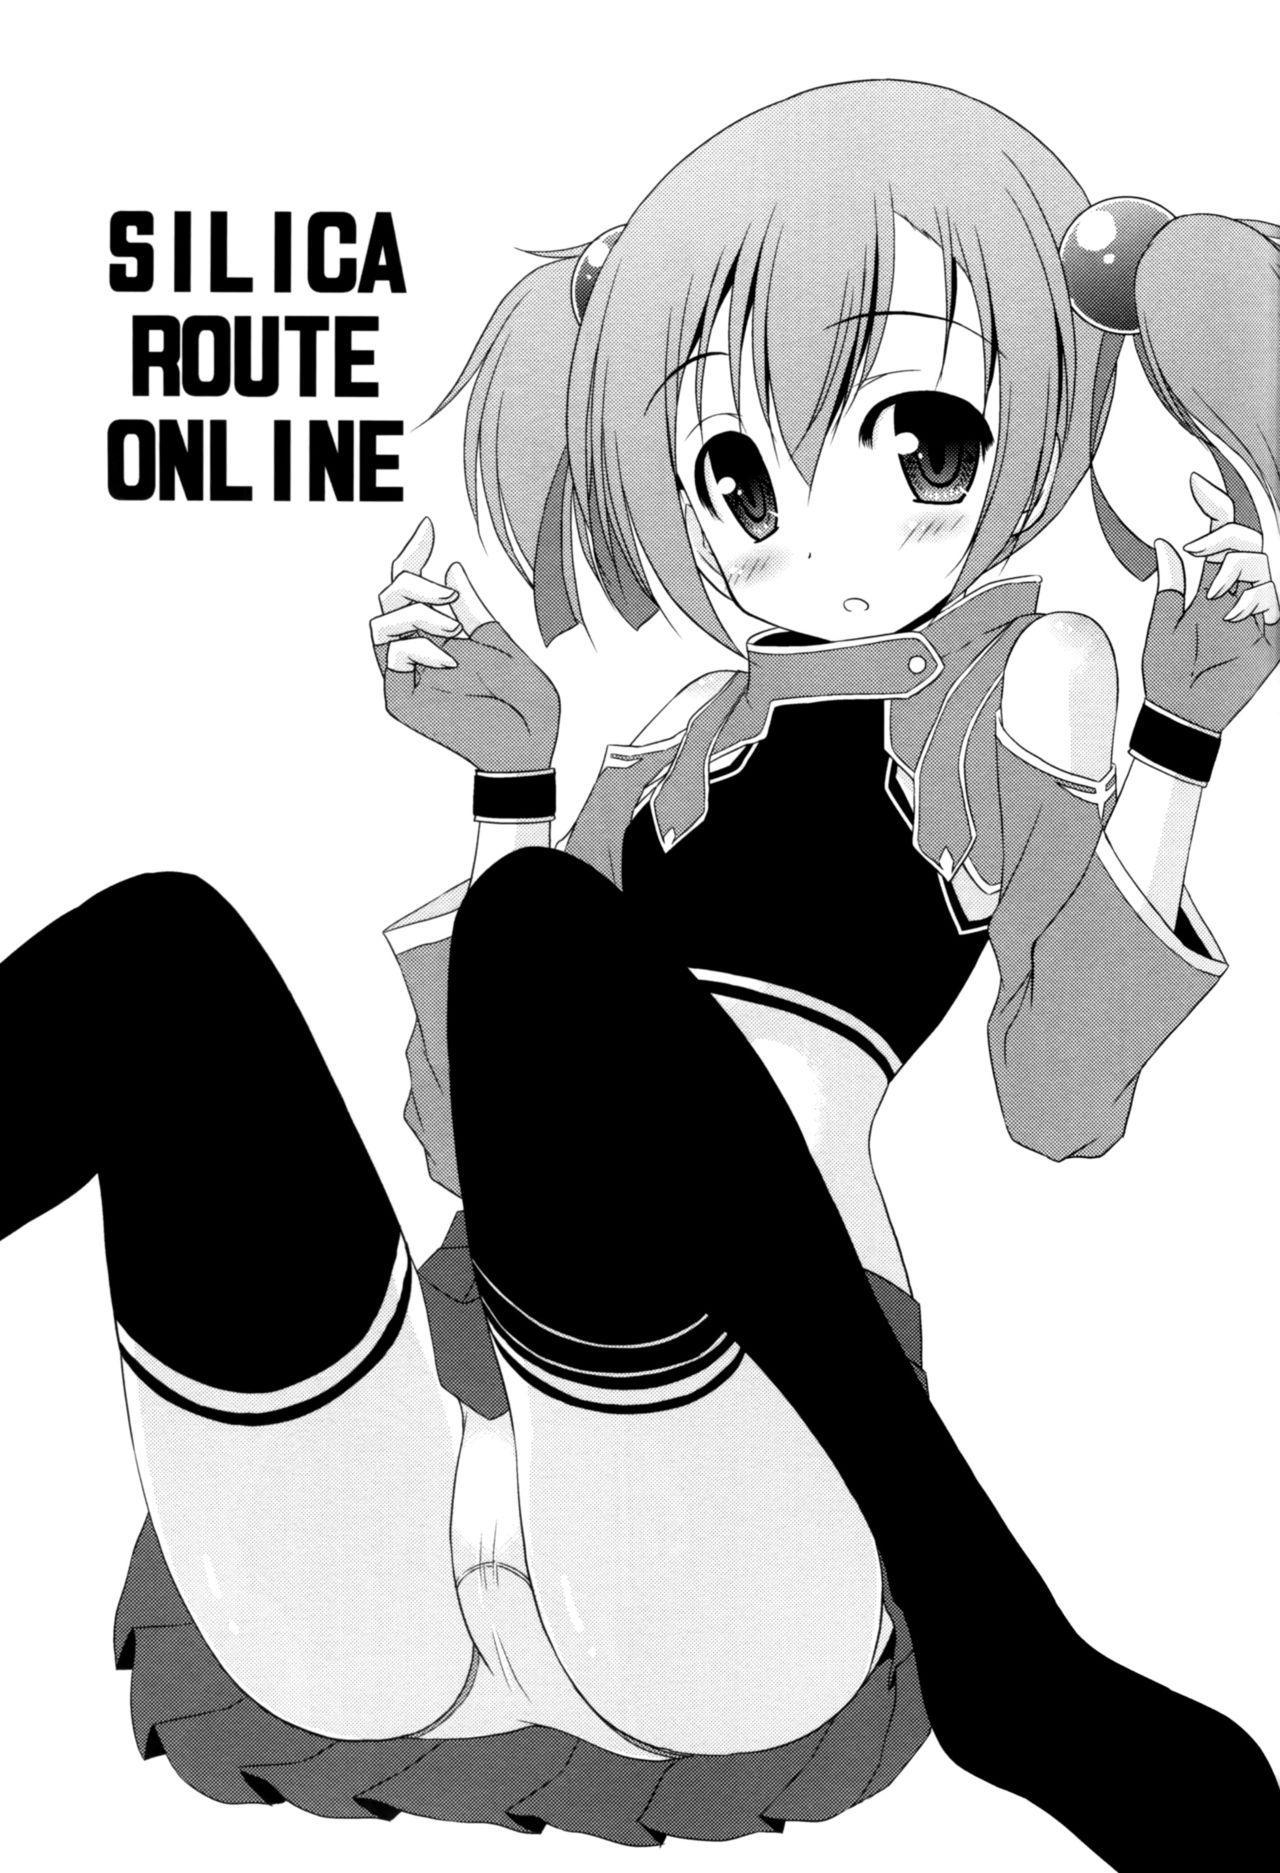 Cougars Silica Route Online - Sword art online Duro - Page 2